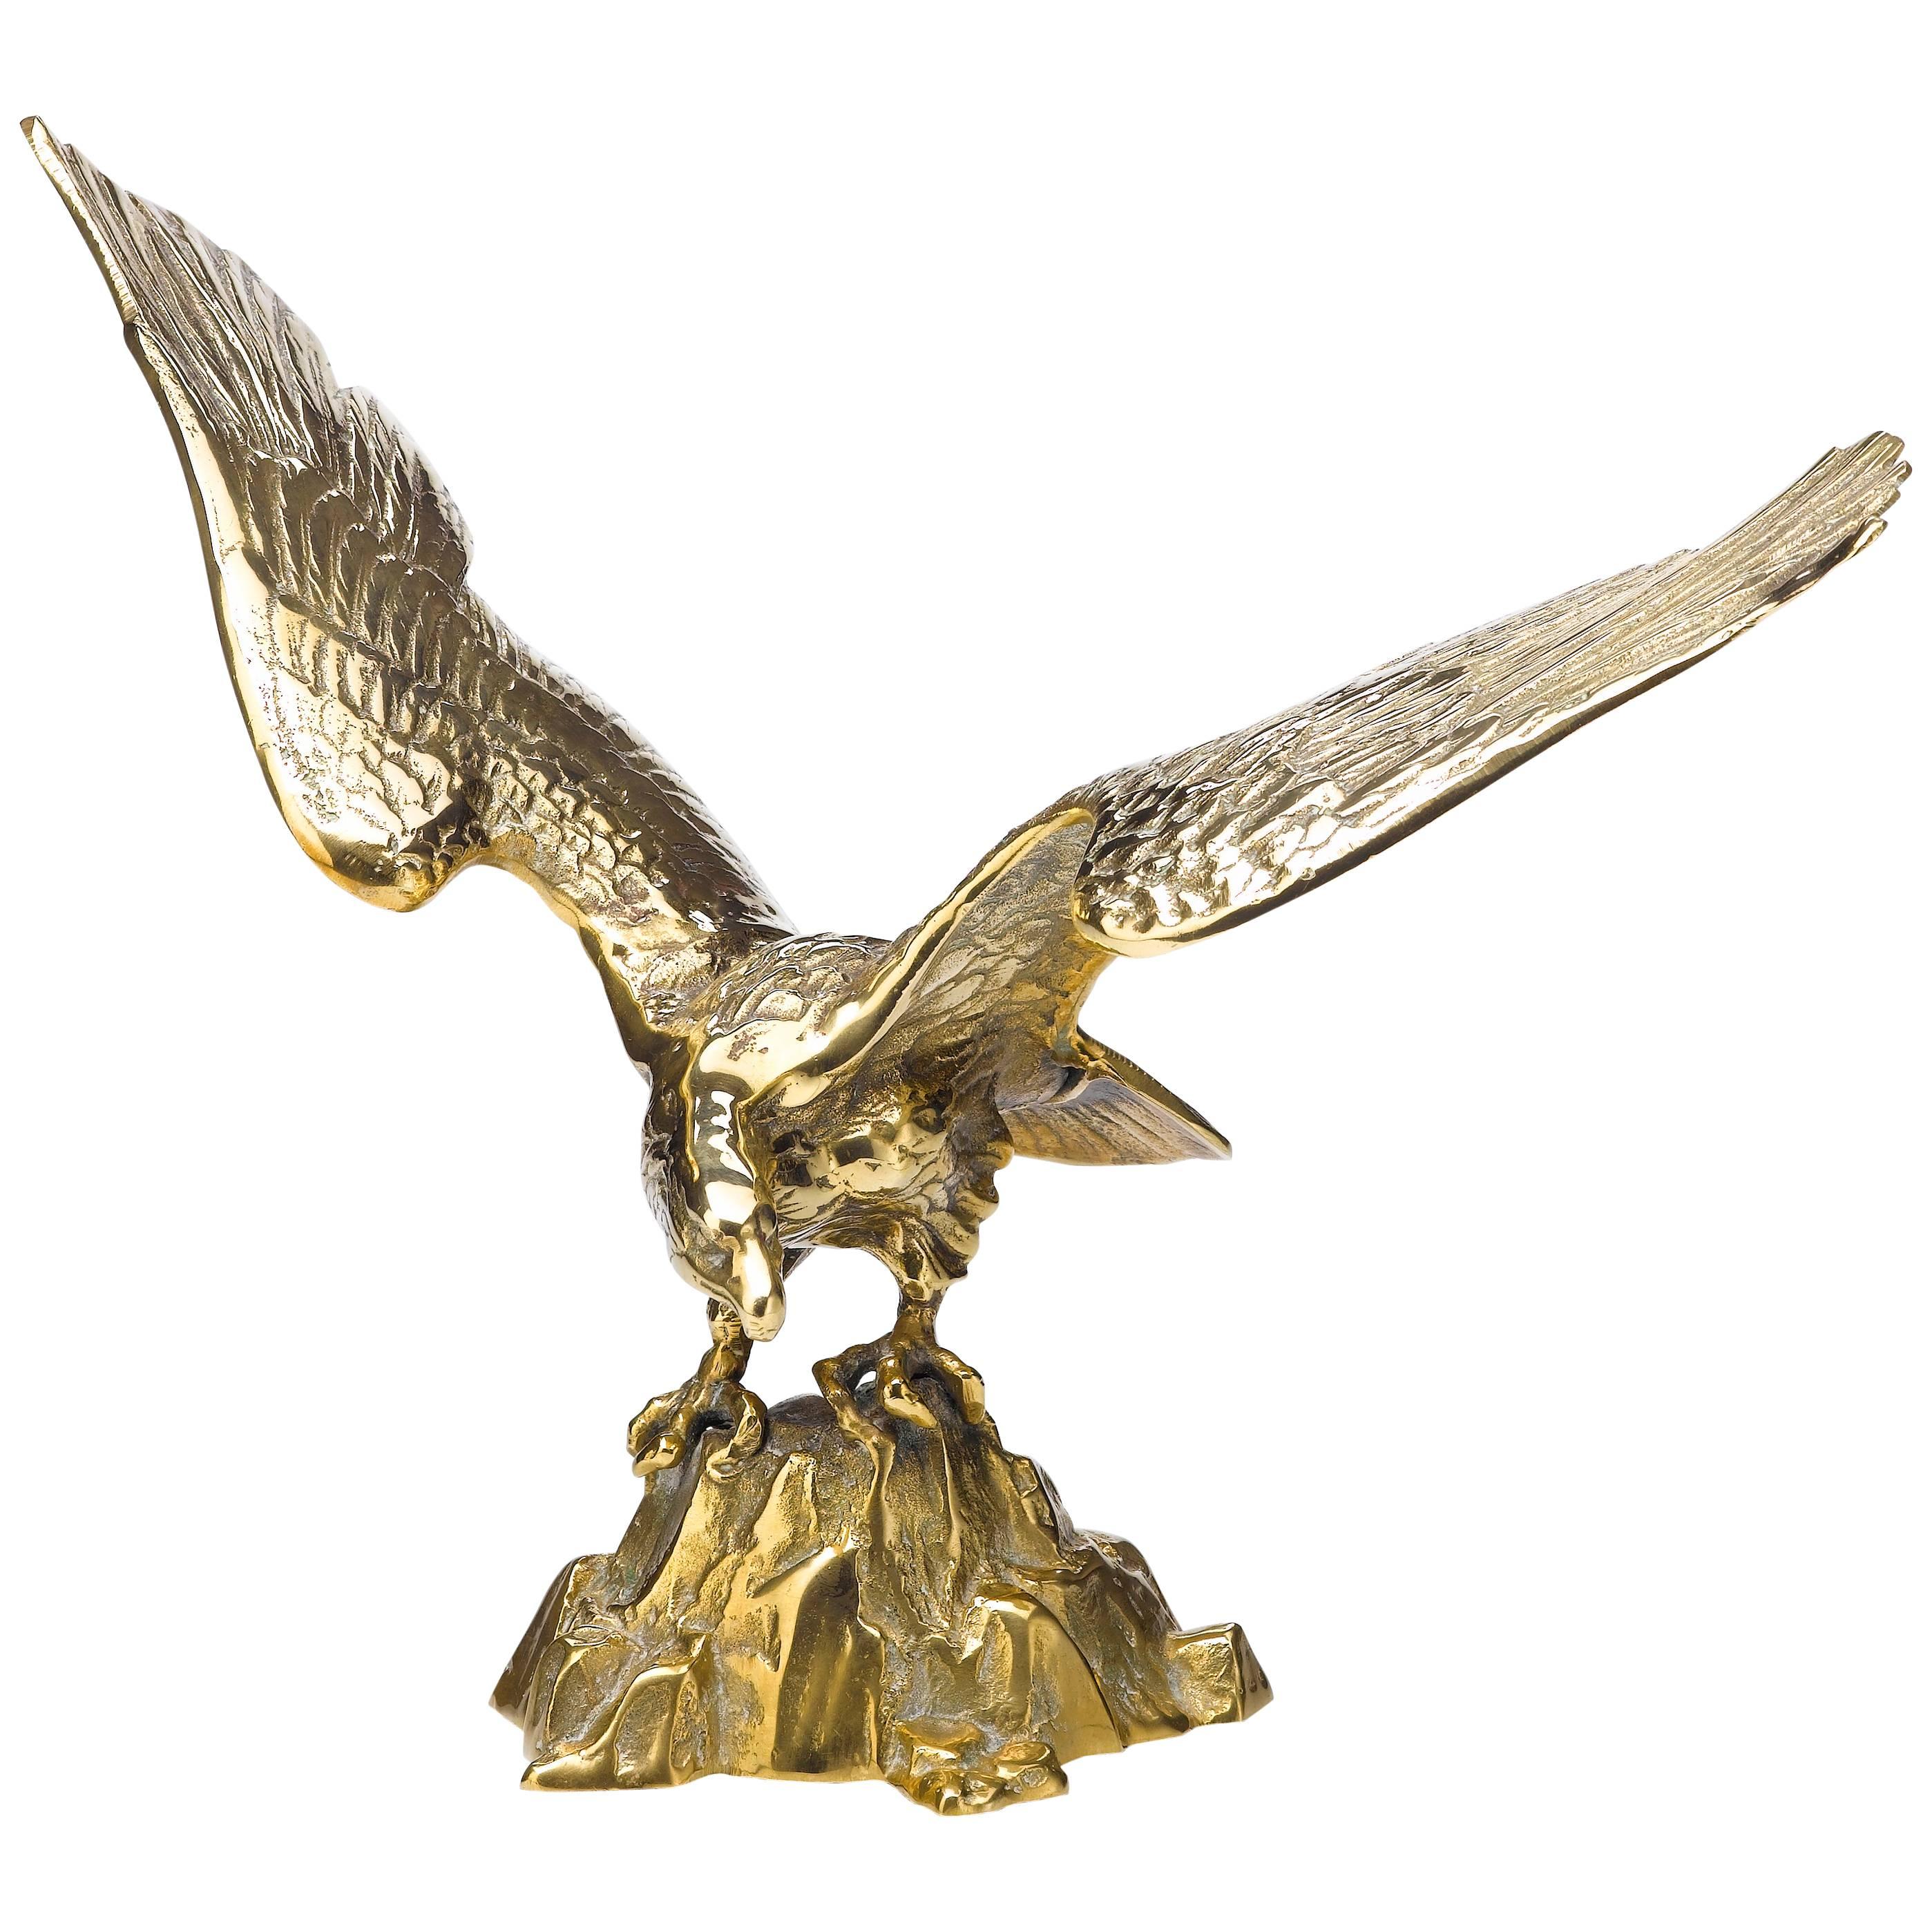 American Eagle Sculpture in Brass, Early 20th Century